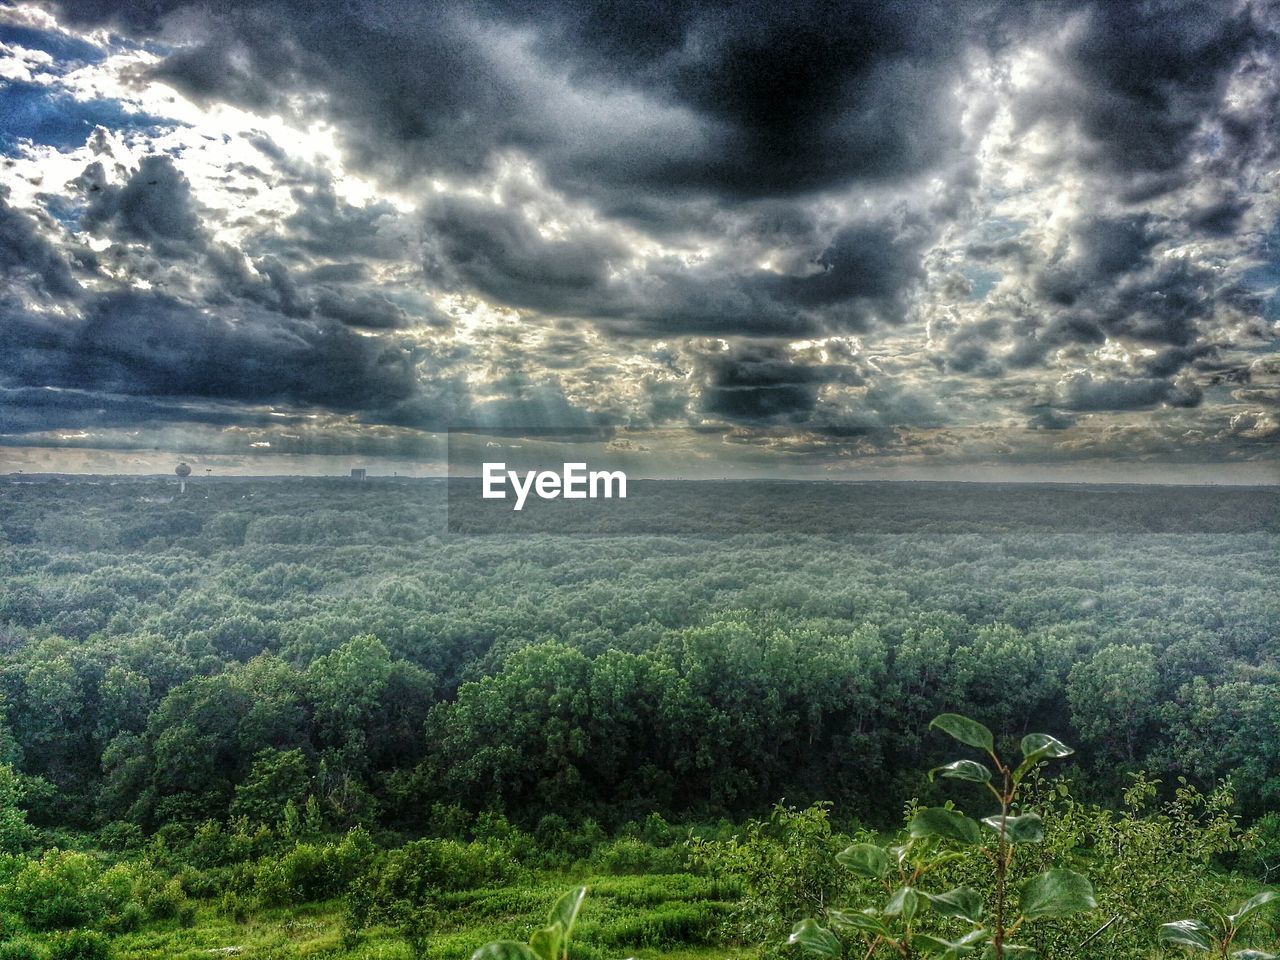 SCENIC VIEW OF LANDSCAPE WITH CLOUDY SKY